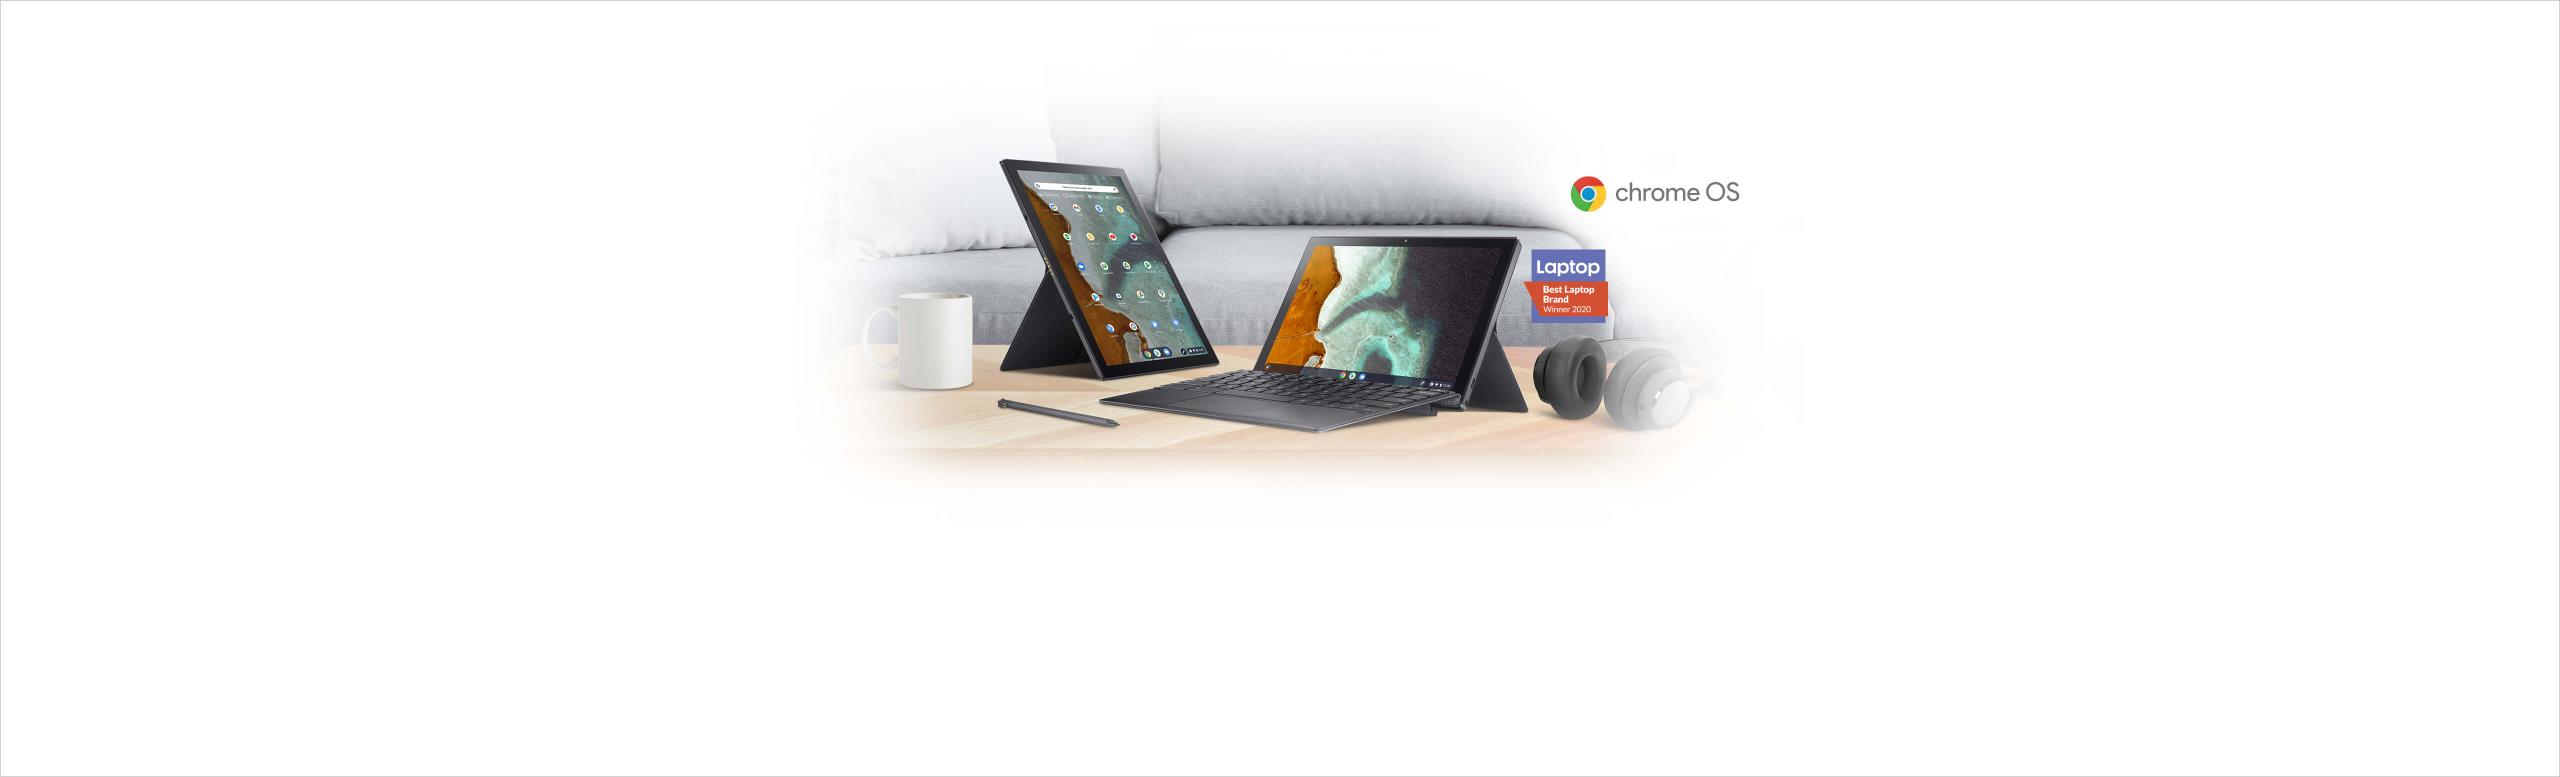 Two ASUS Chromebook Detachable CM3 are shown on a wooden desk with a garaged stylus, a headphone and a mug beside in front of a grey sofa. The one at the front is shown with a horizontal stand design and a keyboard. The other one at the back is shown with a vertical stand design.